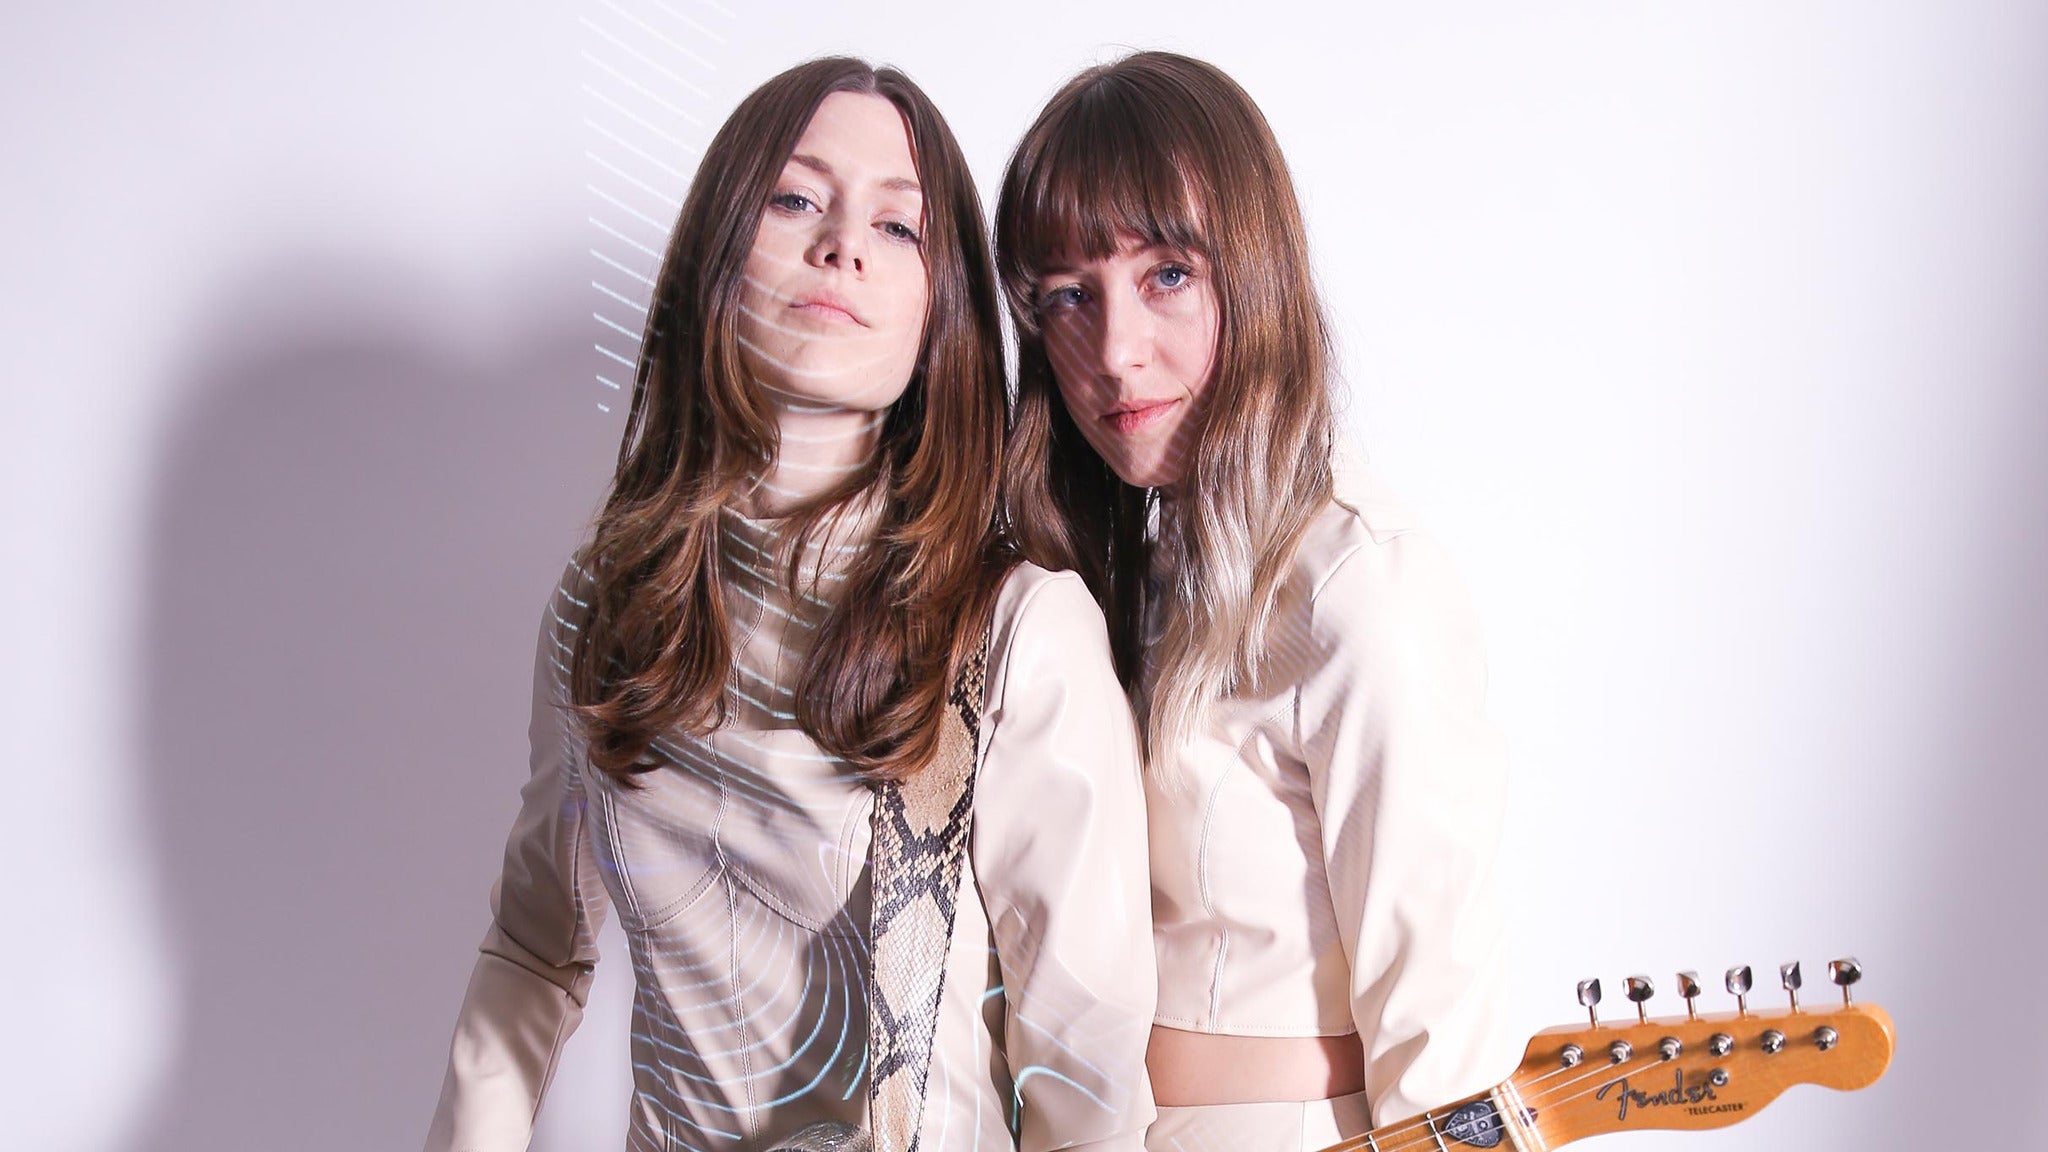 Larkin Poe - Blood Harmony Tour presale passcode for show tickets in Dallas, TX (The Echo Lounge & Music Hall)